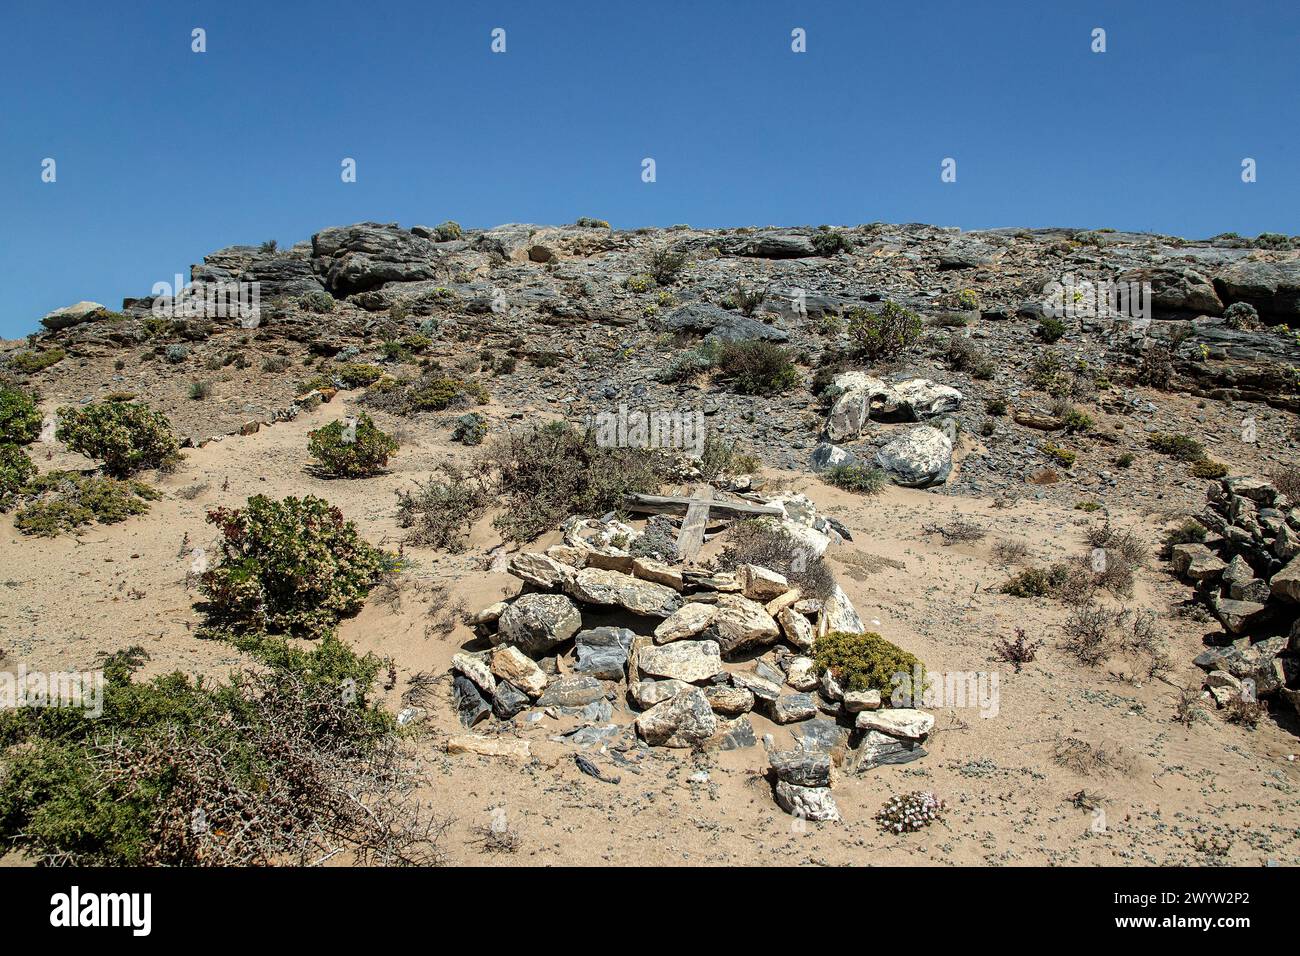 Grave in the small cemetery at Bogenfels in the Forbidden Zone, Namibia. Stock Photo